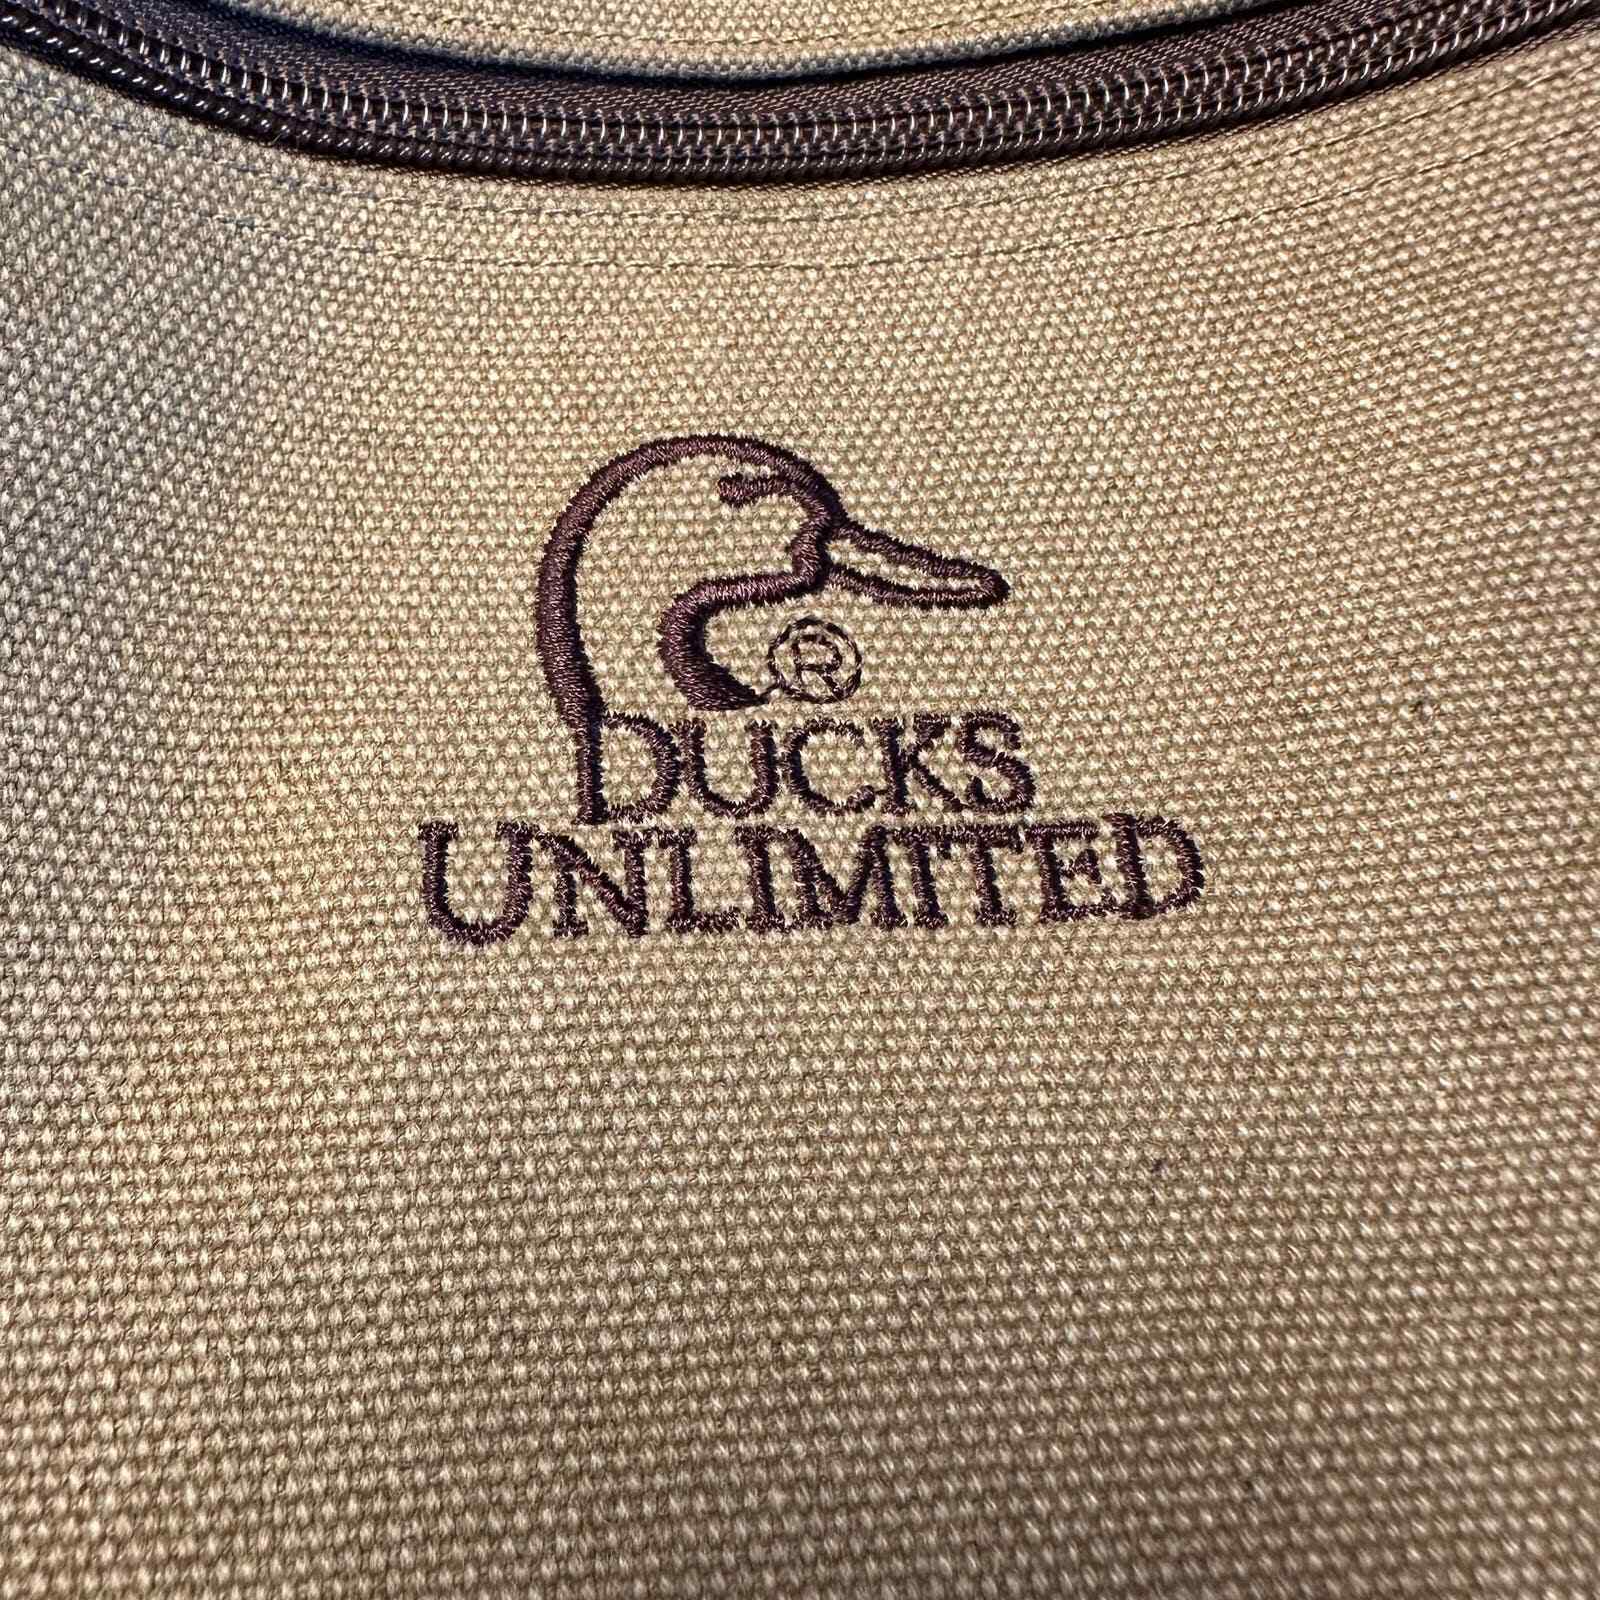 Ducks Unlimited Travel Bag —Great Condition (never used)